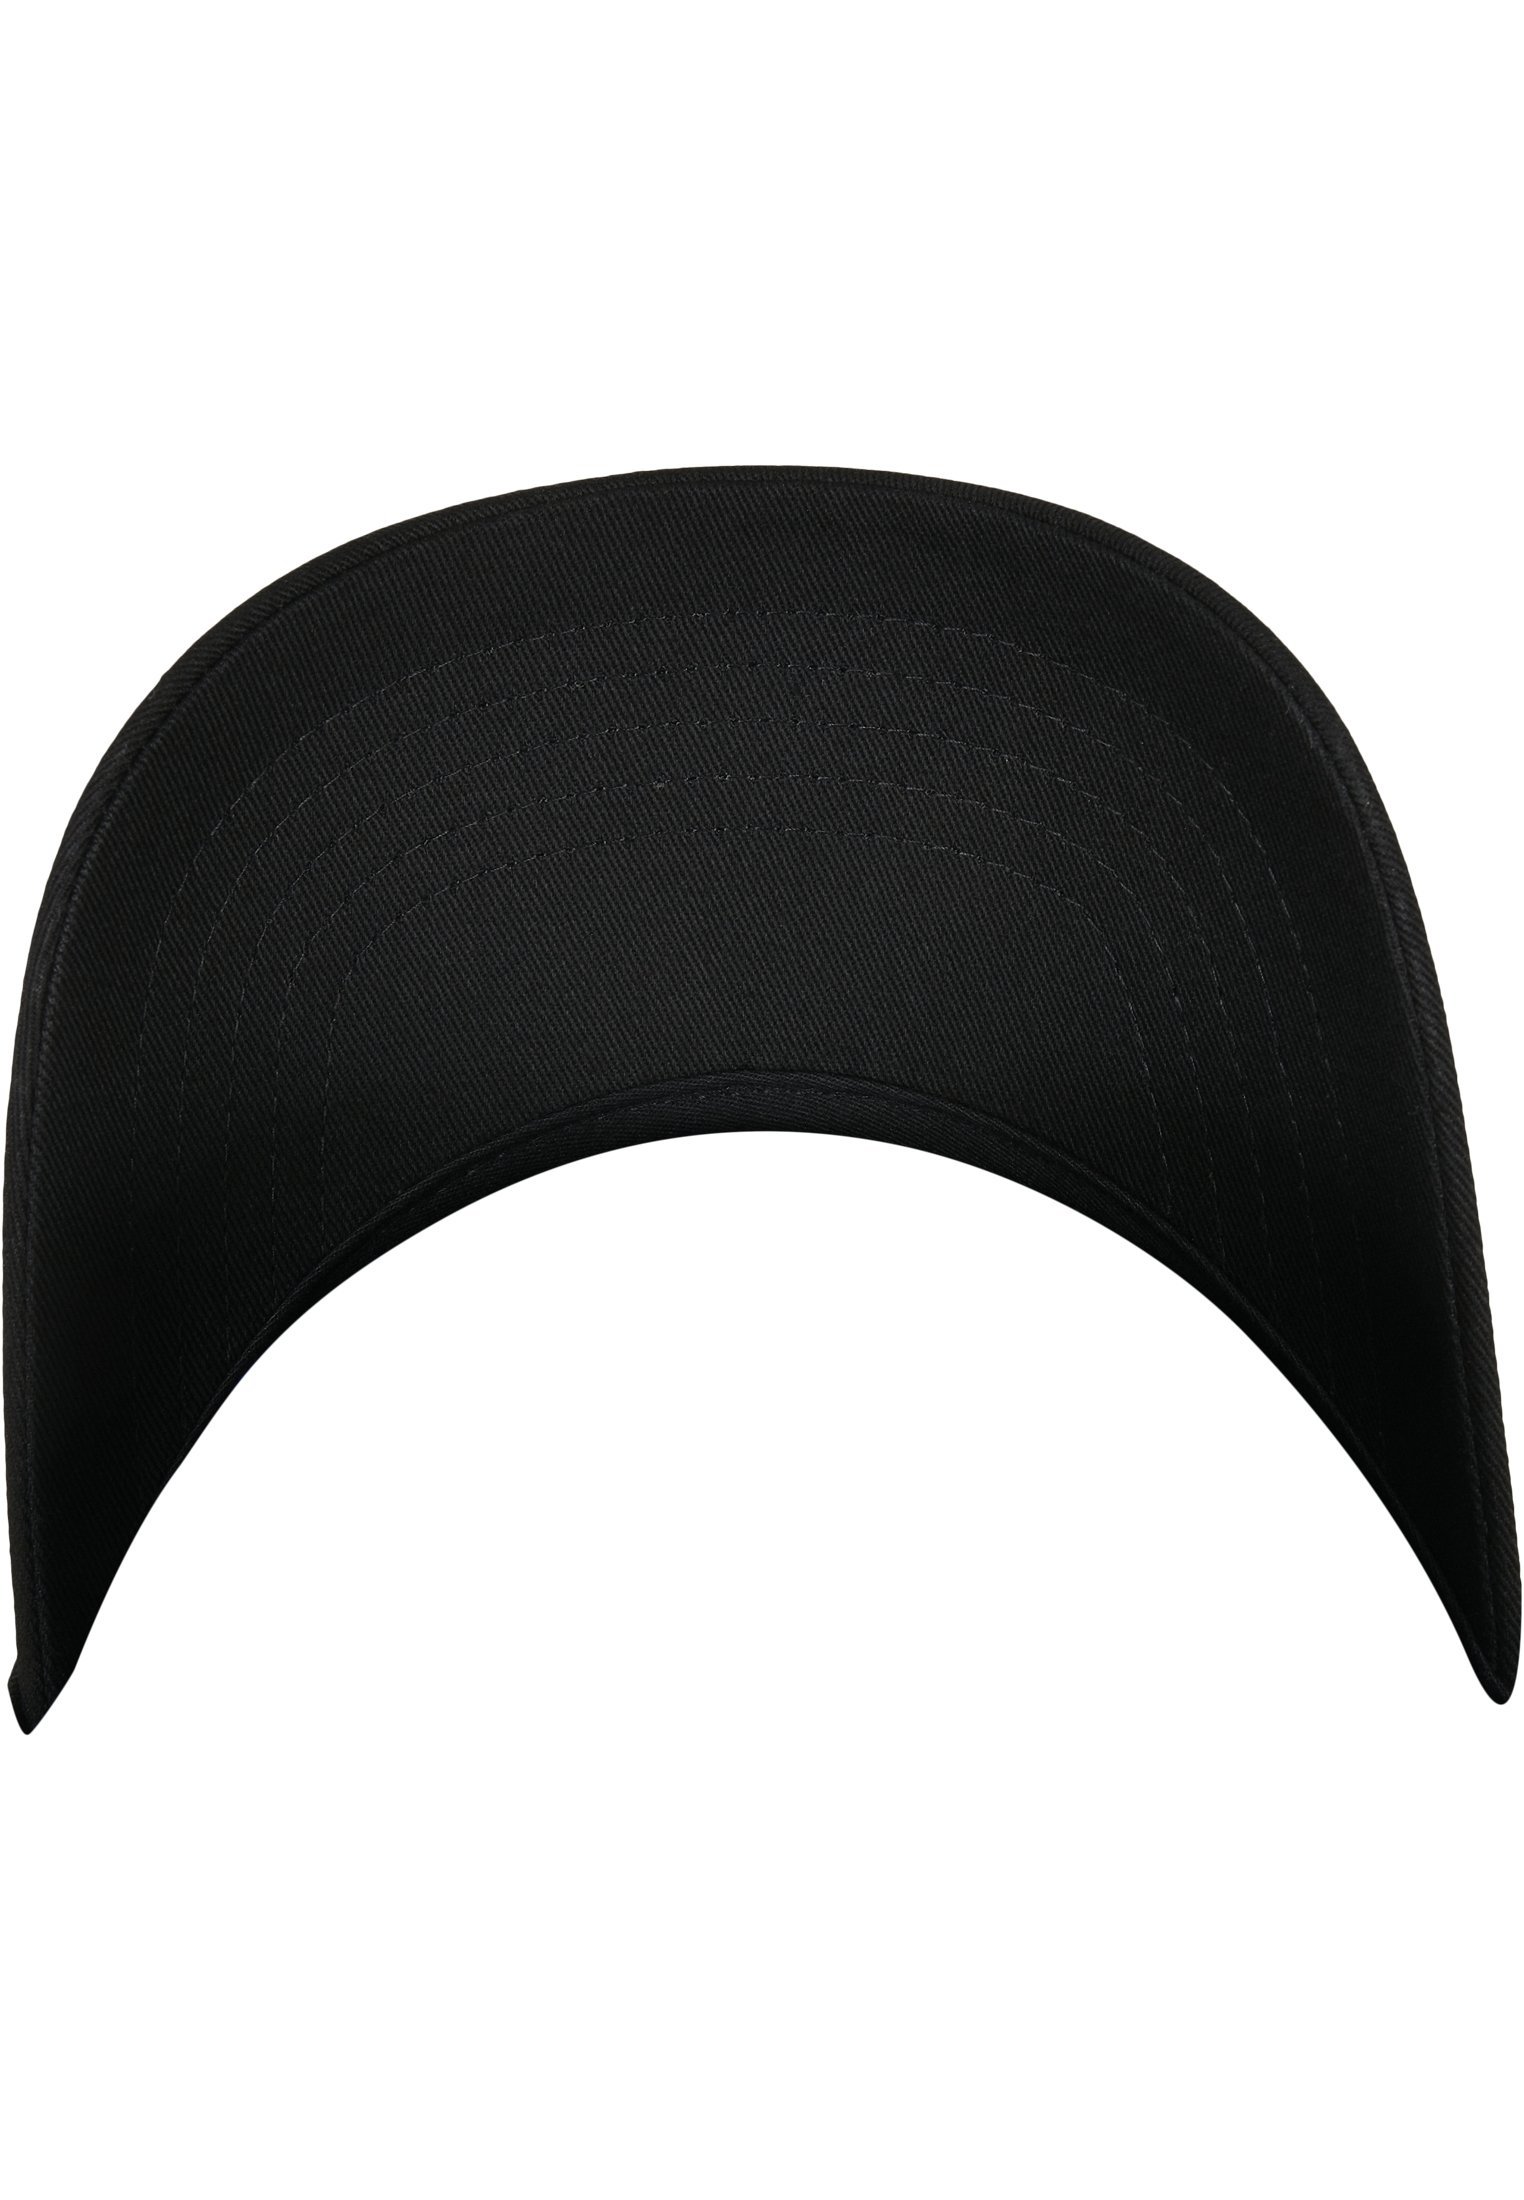 C&S WLPossible Deformation Curved Cap black/mc one size